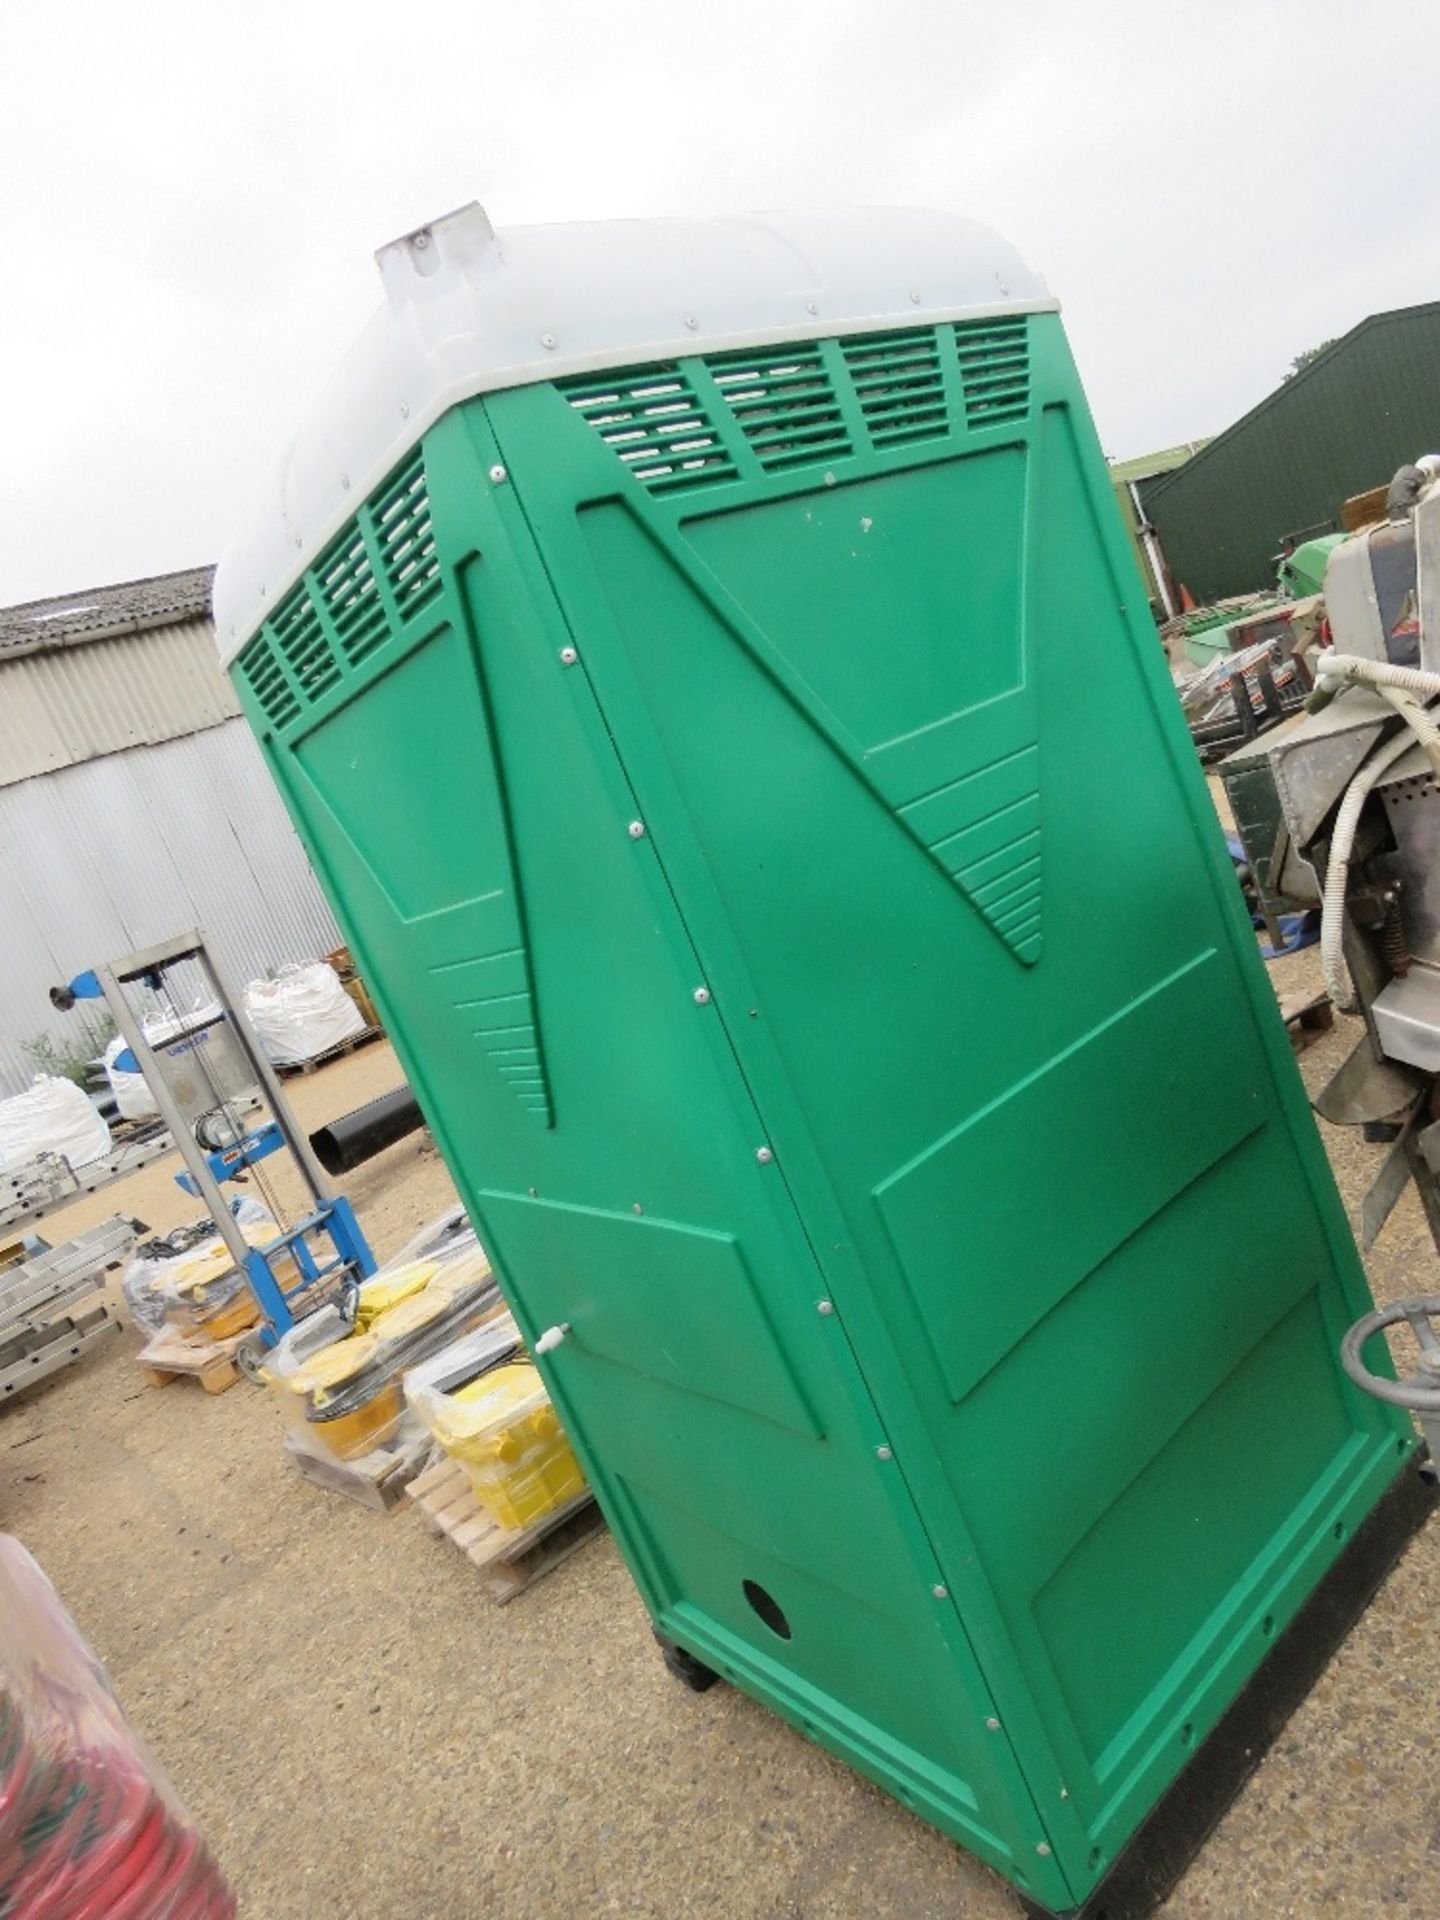 MAINS PORTABLE SITE TOILET. - Image 3 of 7